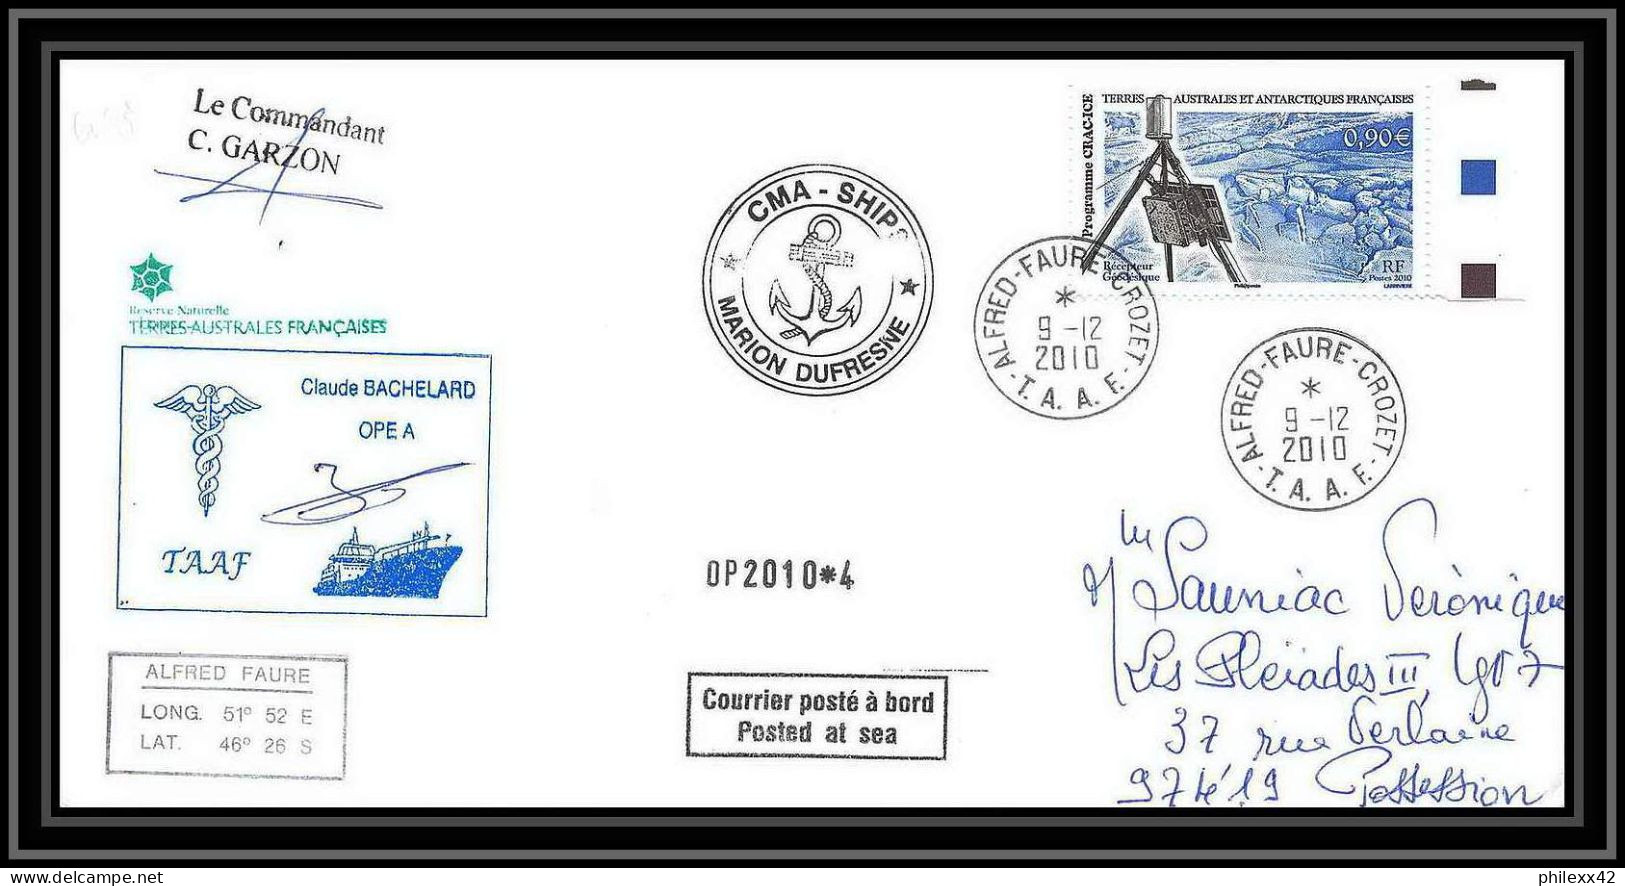 3054 Helilagon Dufresne Signé Signed Op 2010/4 Crozet 9/12/2010 N°559 ANTARCTIC Terres Australes (taaf) Lettre Cover - Helicópteros